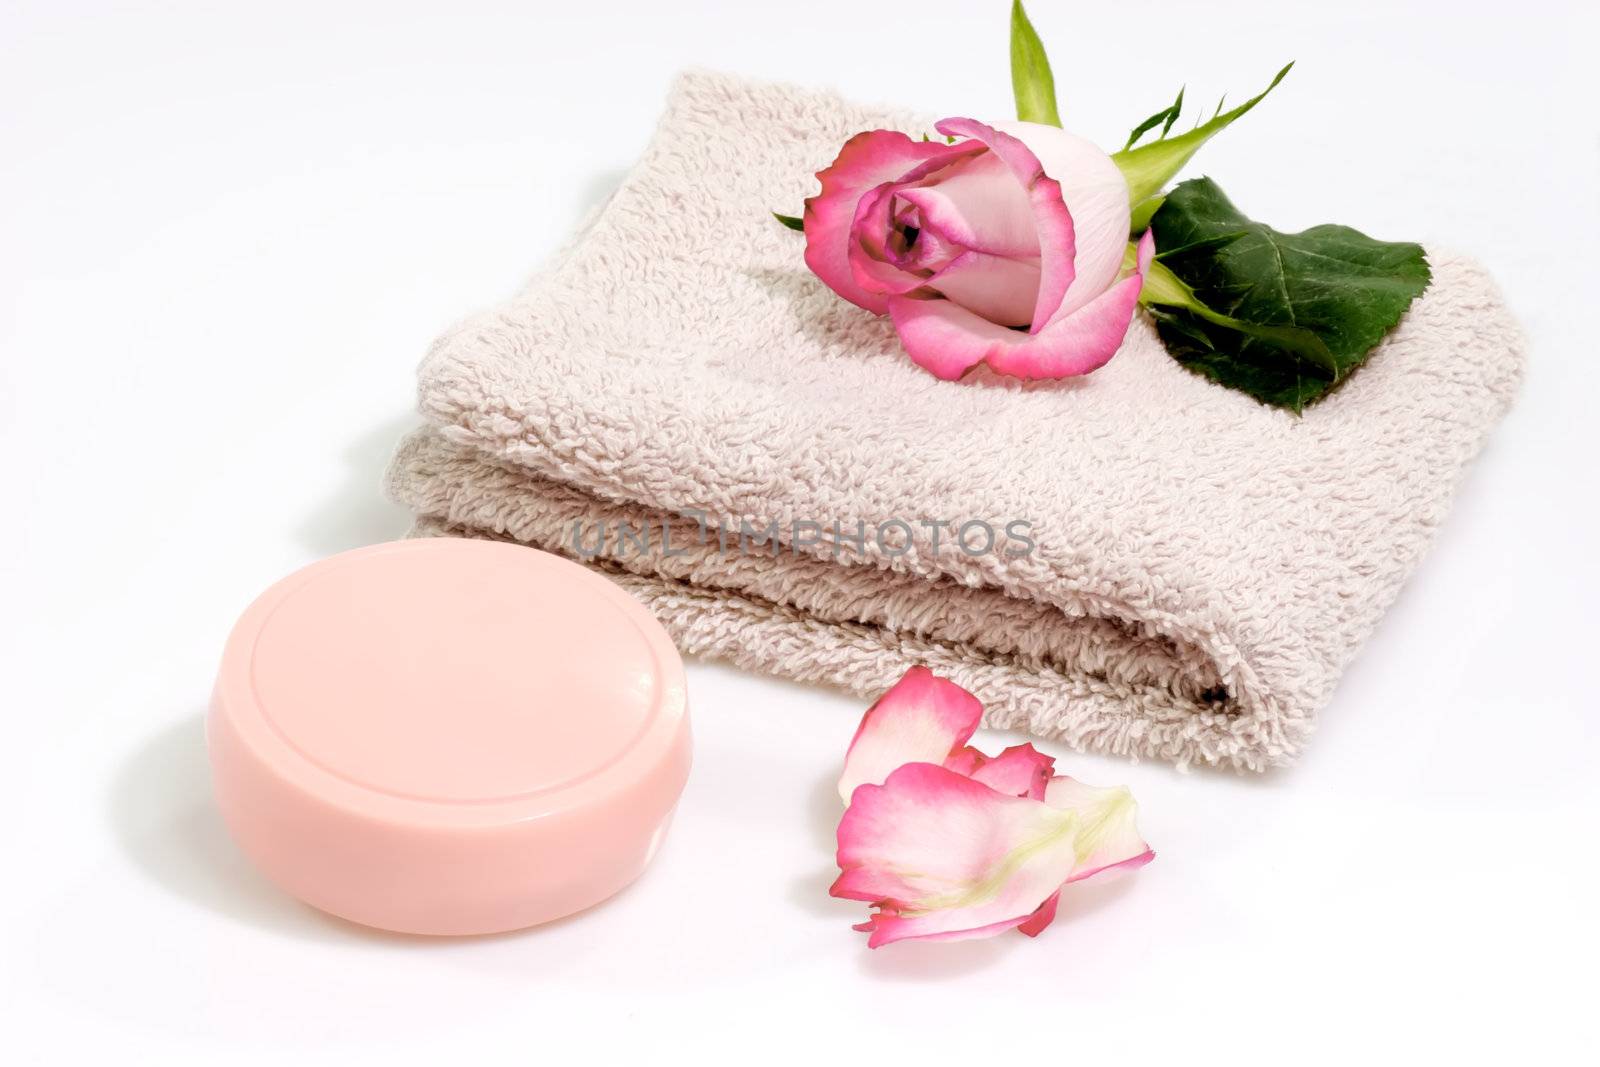 Towel and soap on a bright background